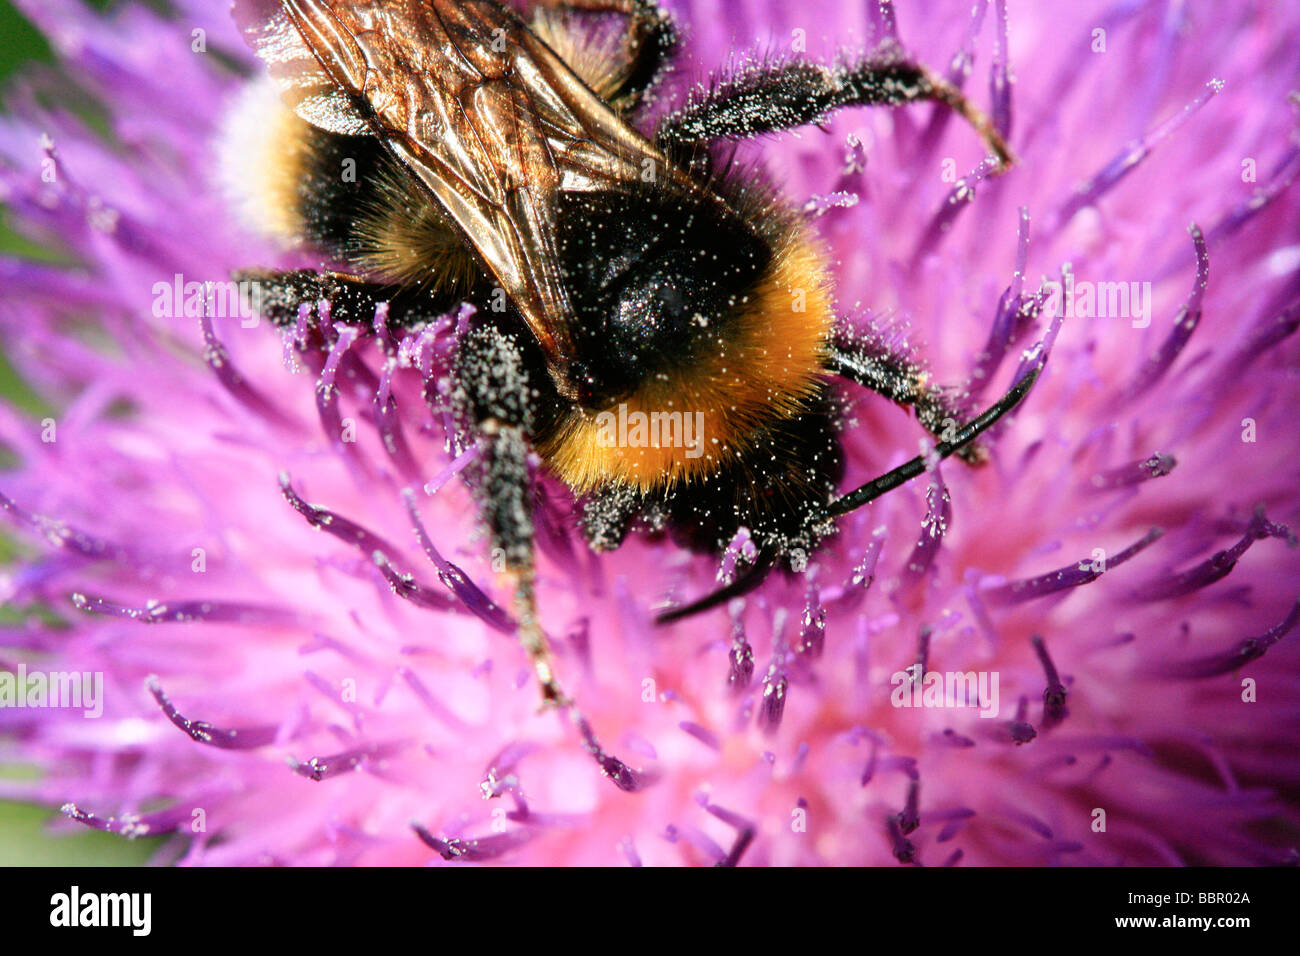 A bumblebee on a thistle Stock Photo